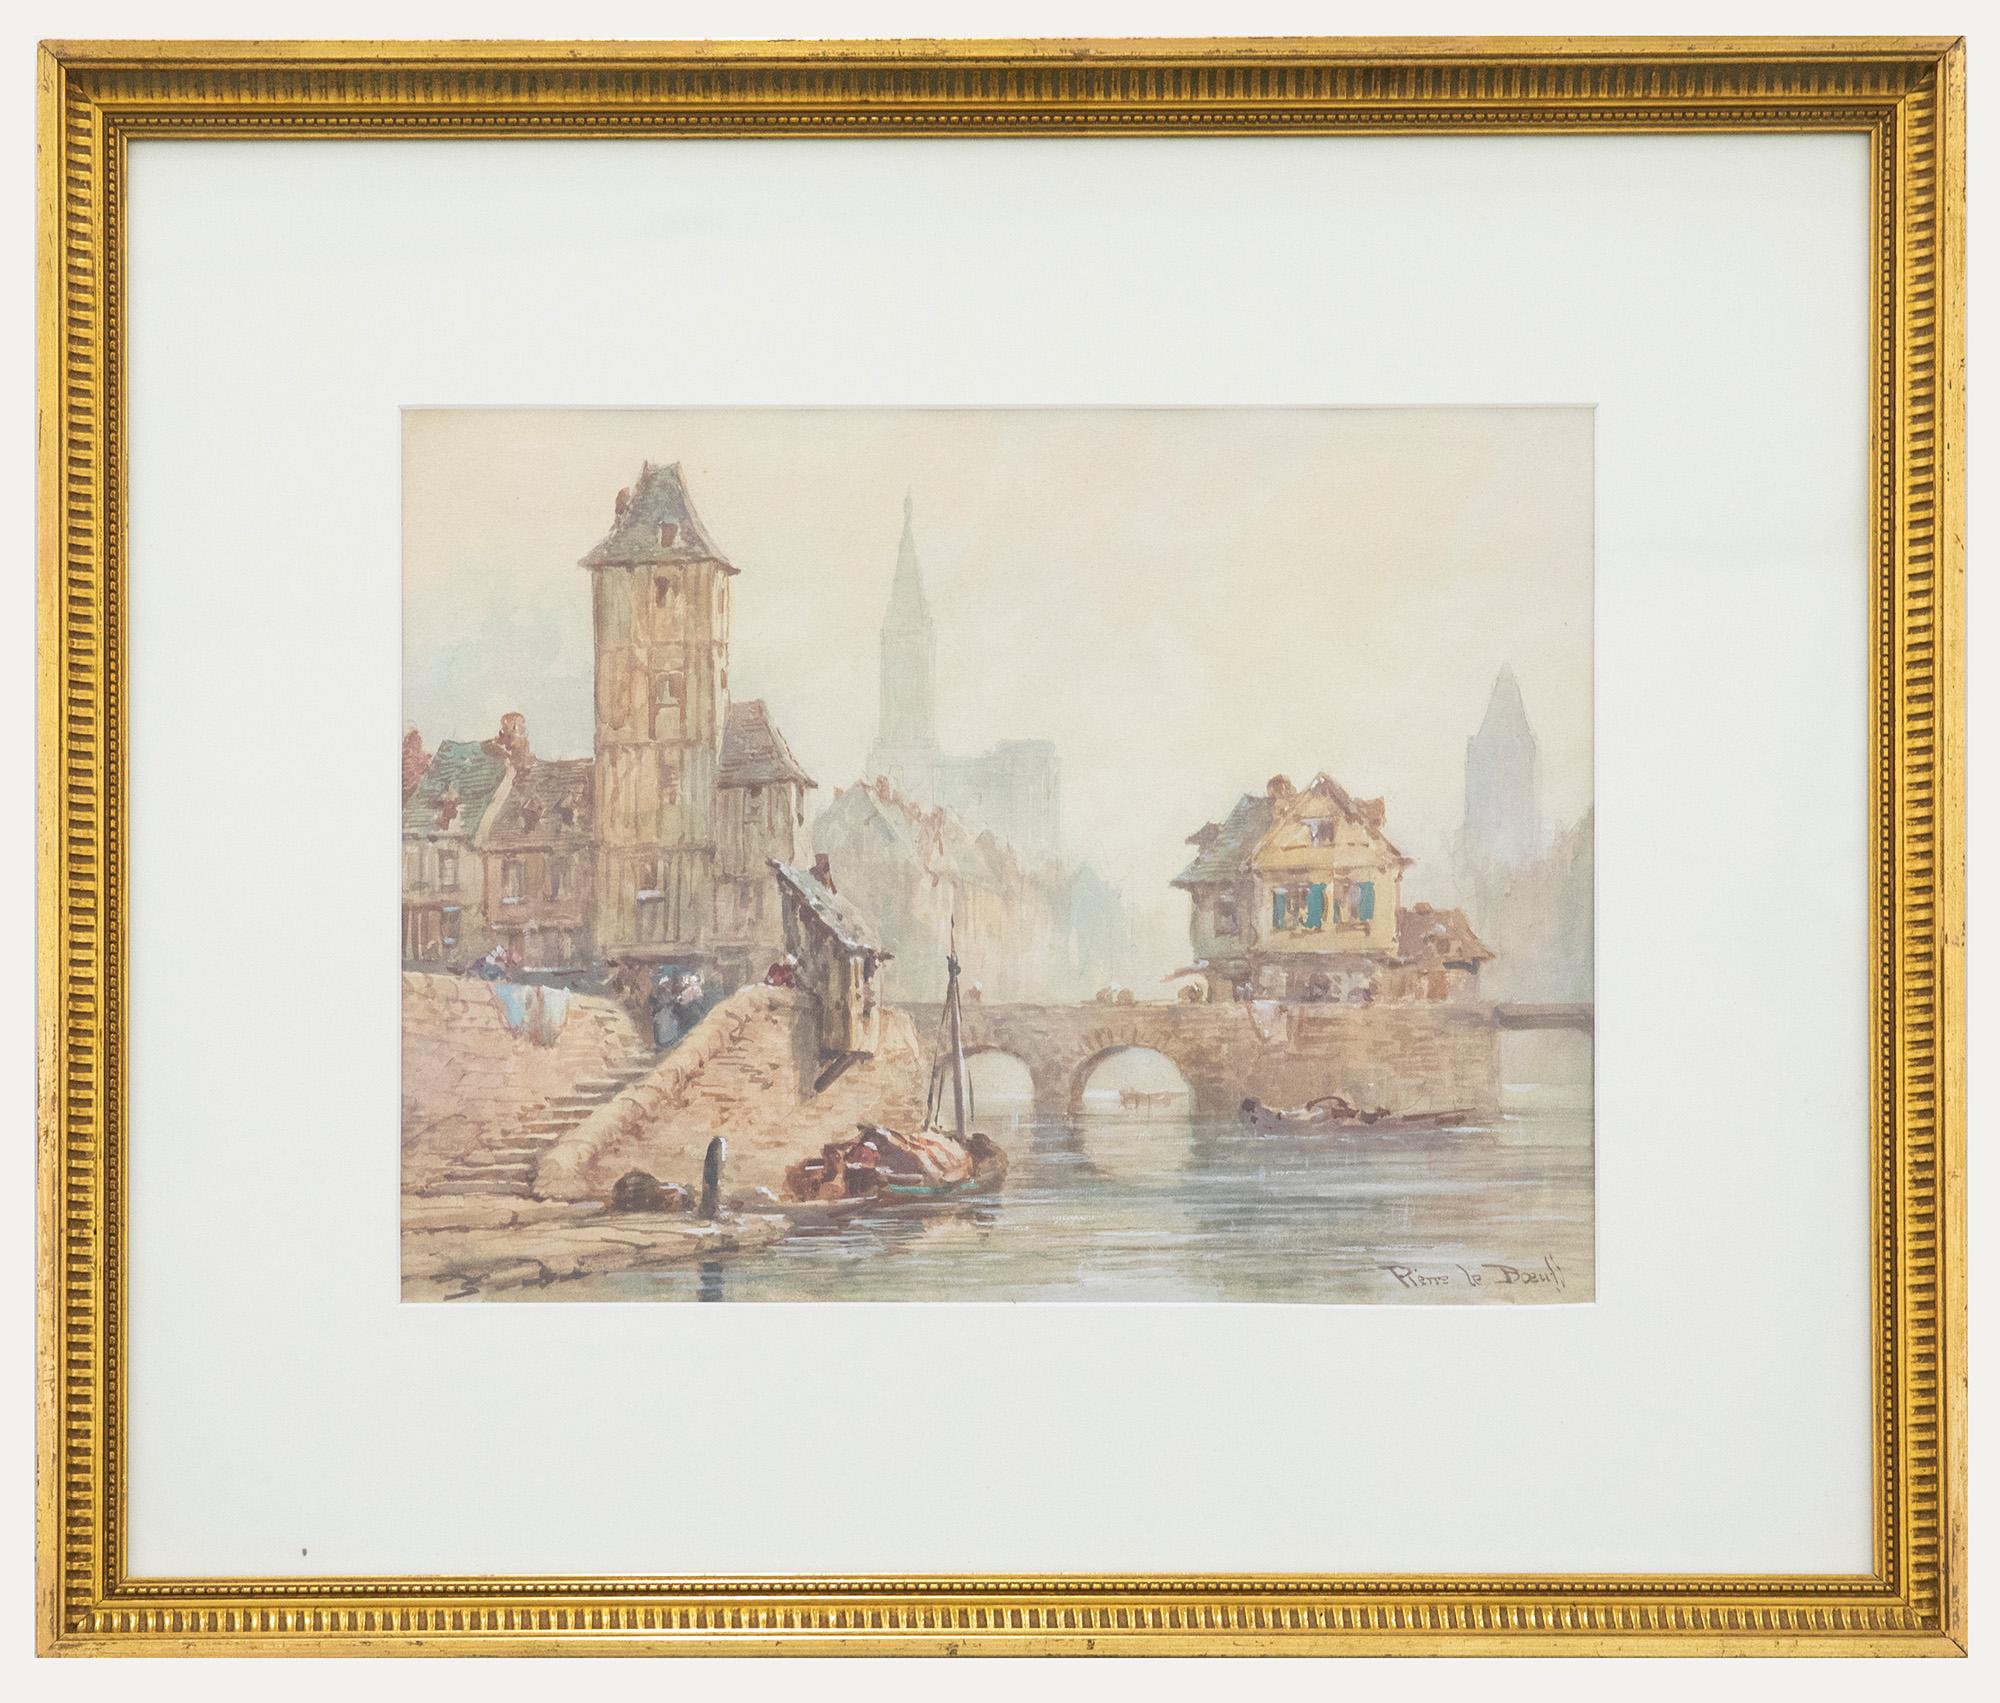 A delightful depiction of the French city of Anger with stone bridge crossing the River Maine. The architectural scene has been signed by the artist to the lower right. Well presented in an attractive gilt-effect frame with a new card mount.